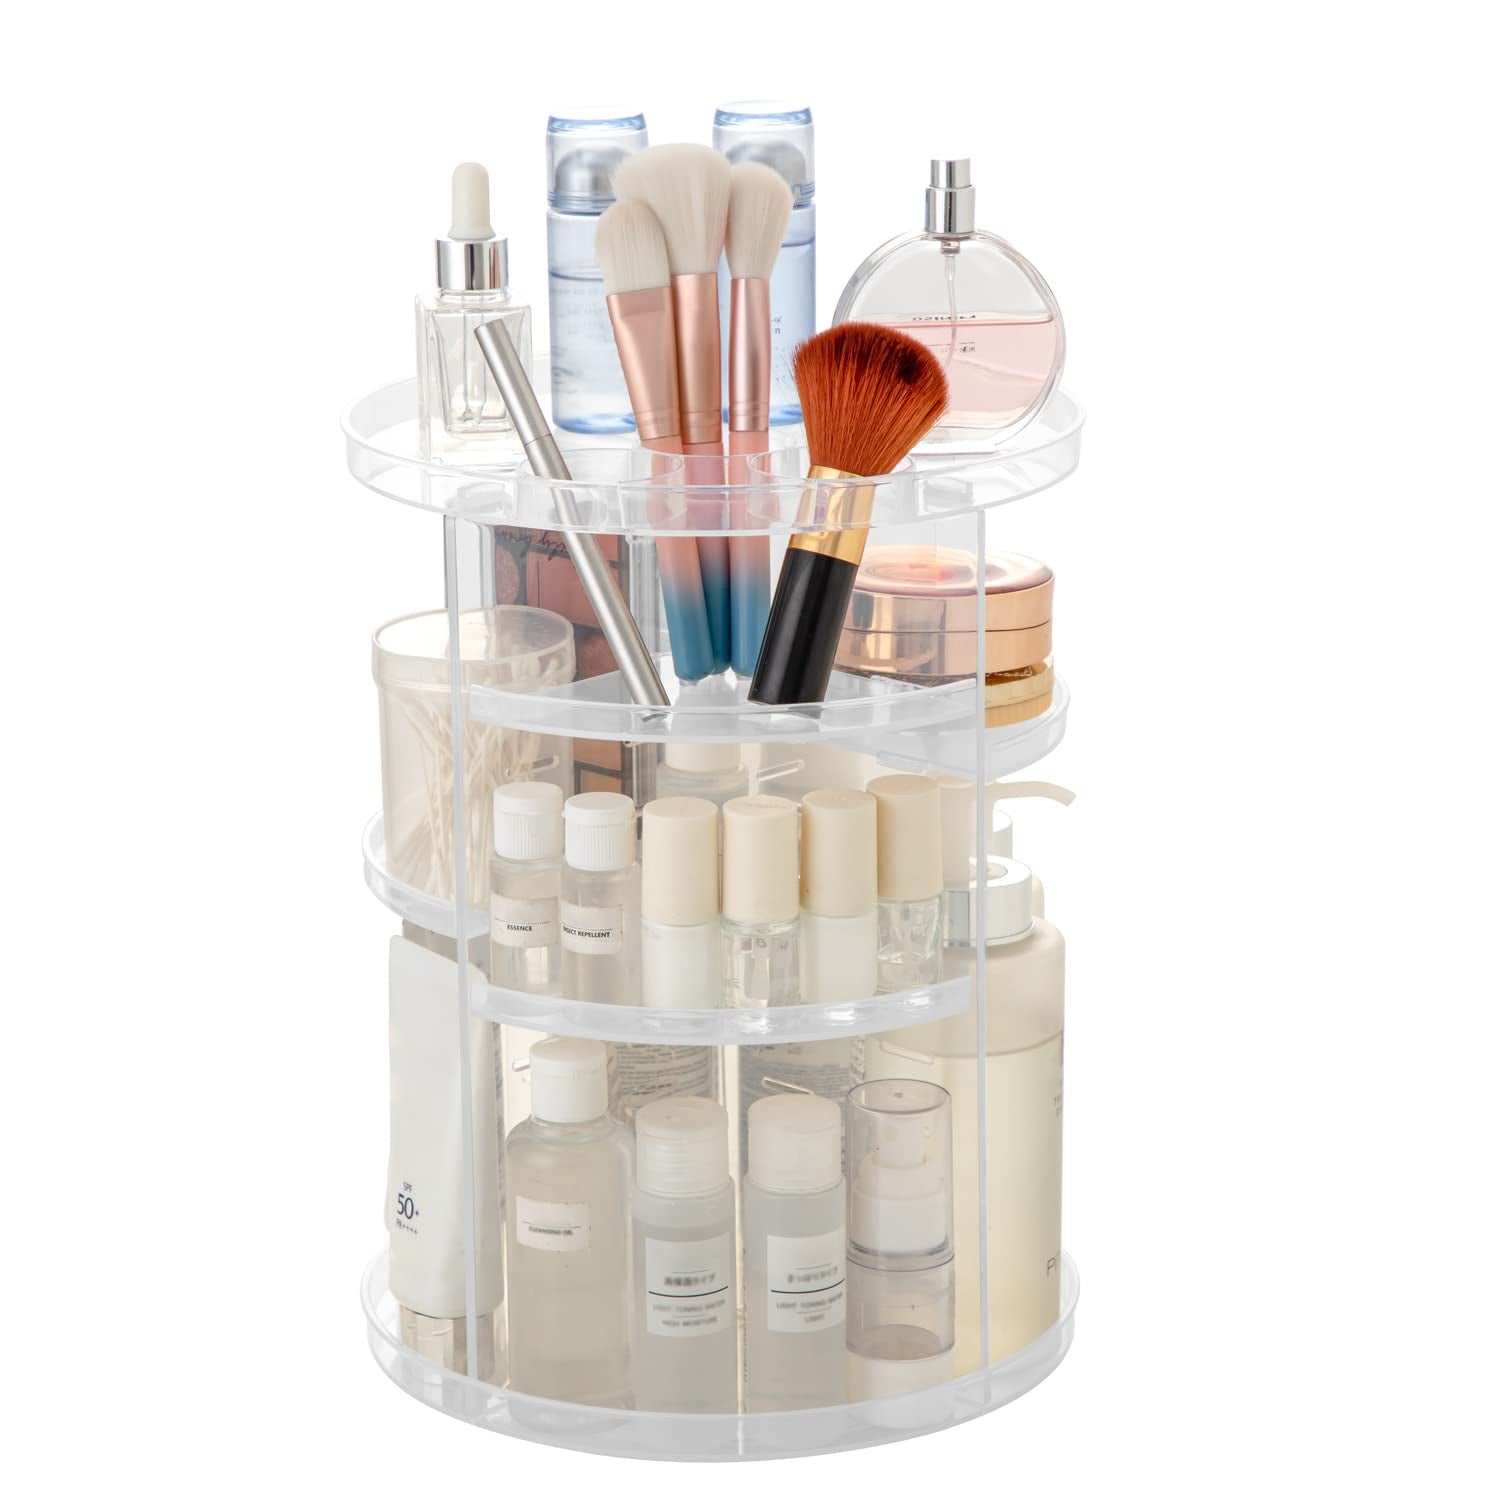 Rotating Makeup Organizer, DIY 8 Adjustable Layers Spinning Skincare Organizer, Cosmetic Display Case with Brush Holder Perfume Tray, Multi-Function Storage Carousel for Vanity Bathroom Countertop